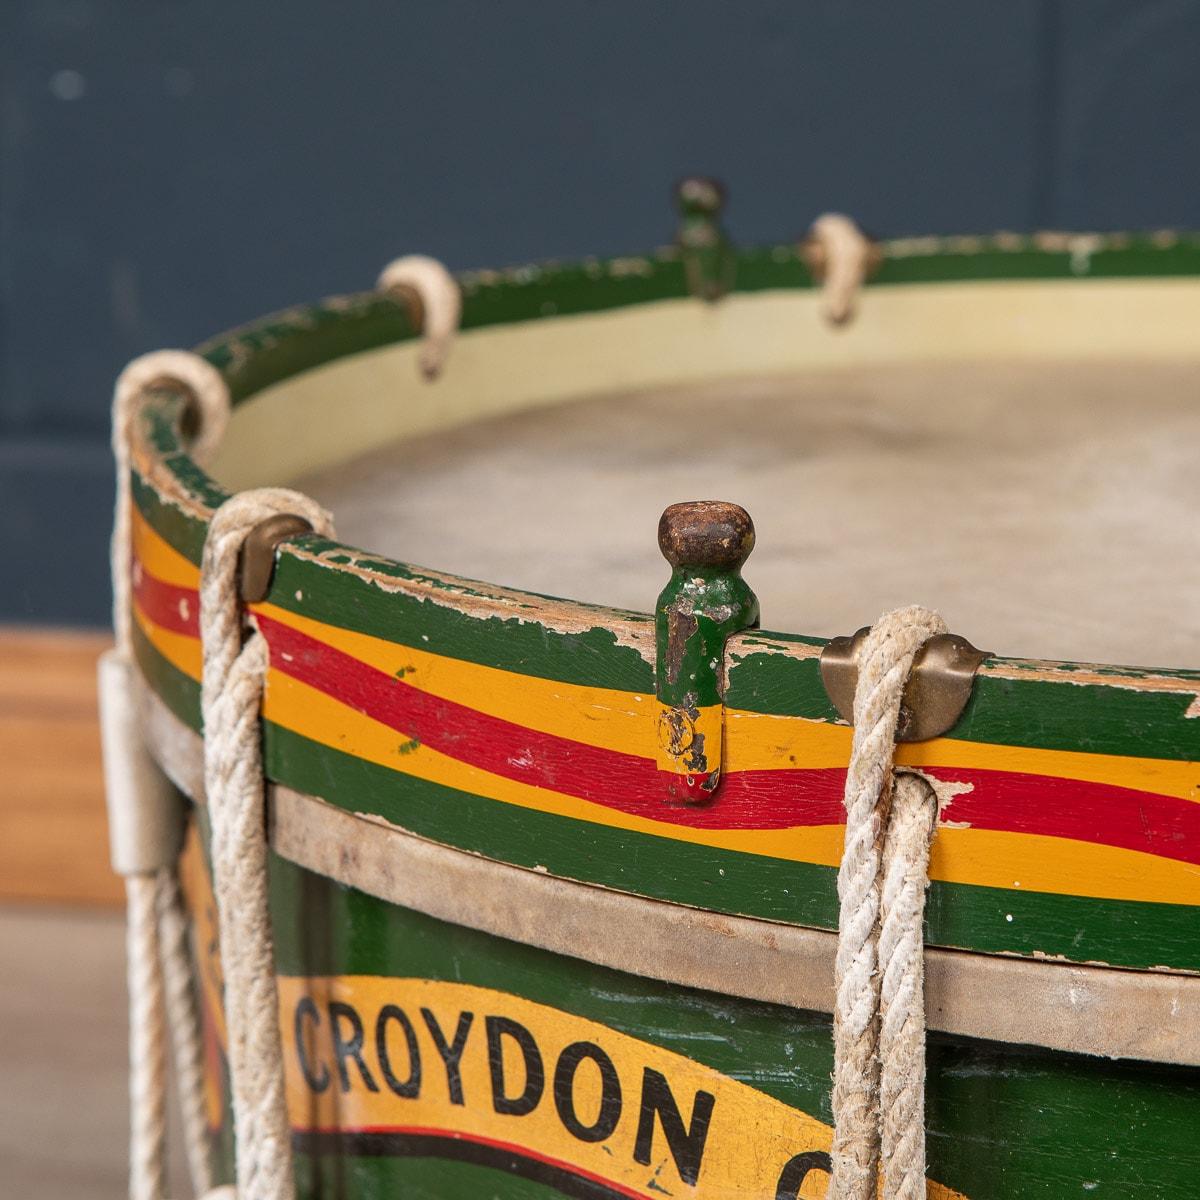 20th Century British Ceremonial Drum from the 22nd Croydon Group 3